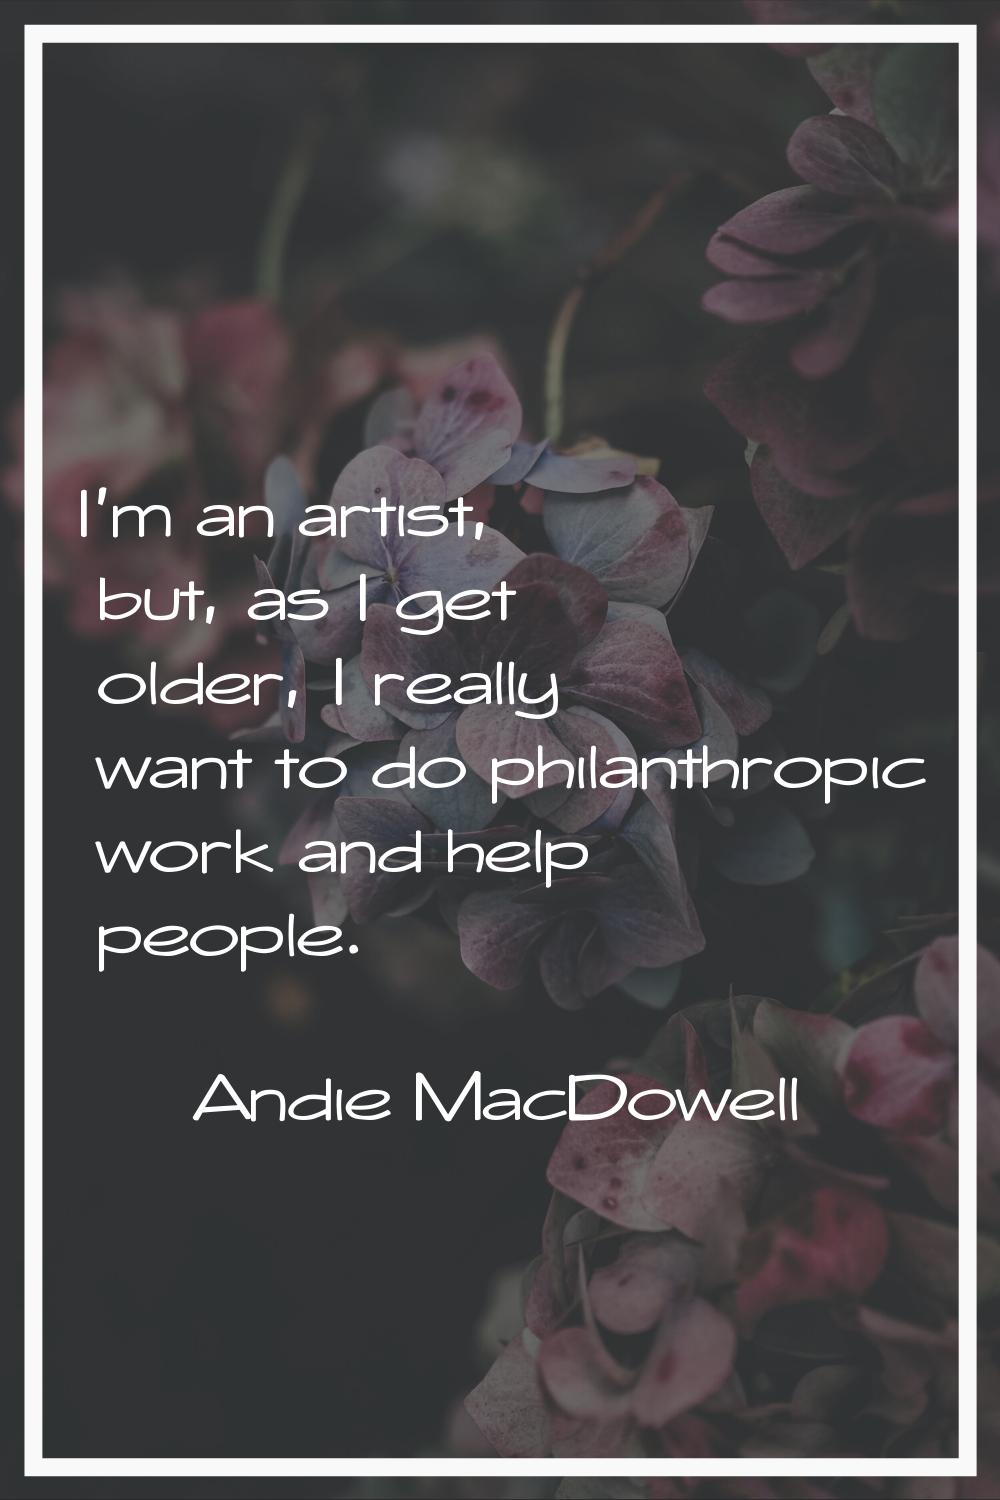 I'm an artist, but, as I get older, I really want to do philanthropic work and help people.